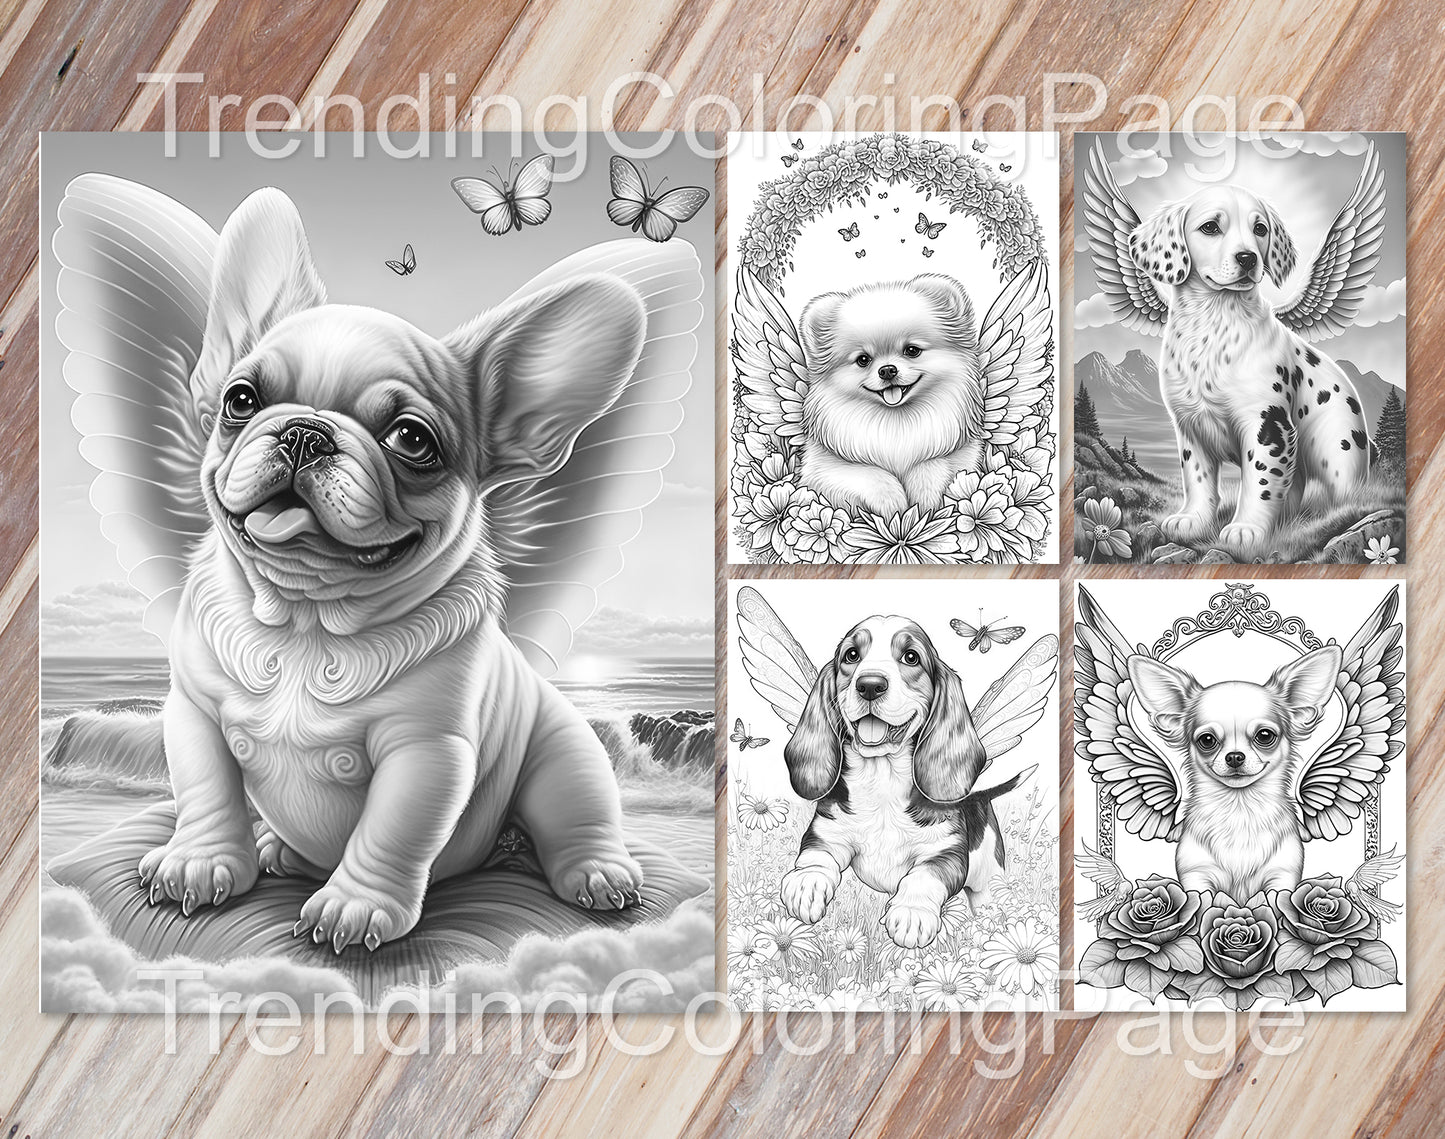 20 Lovely Angel Puppies Grayscale Coloring Pages - Instant Download - Printable Dark/Light